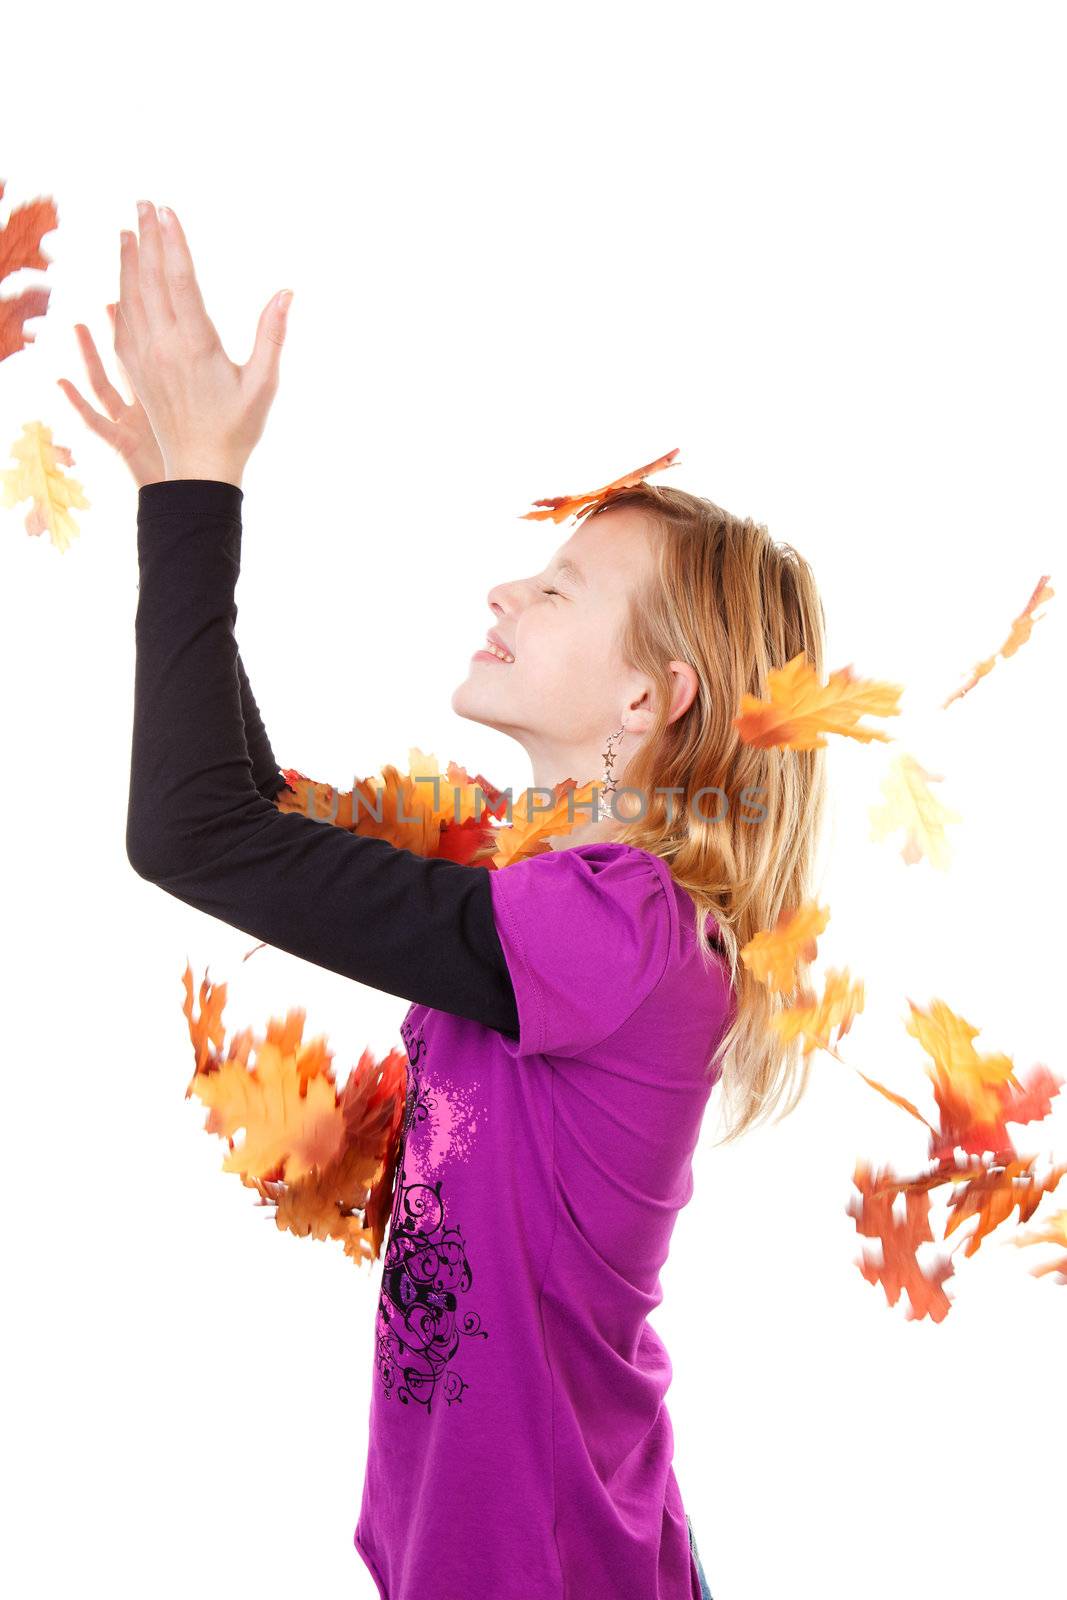 Girl and falling autumn leaves against white background